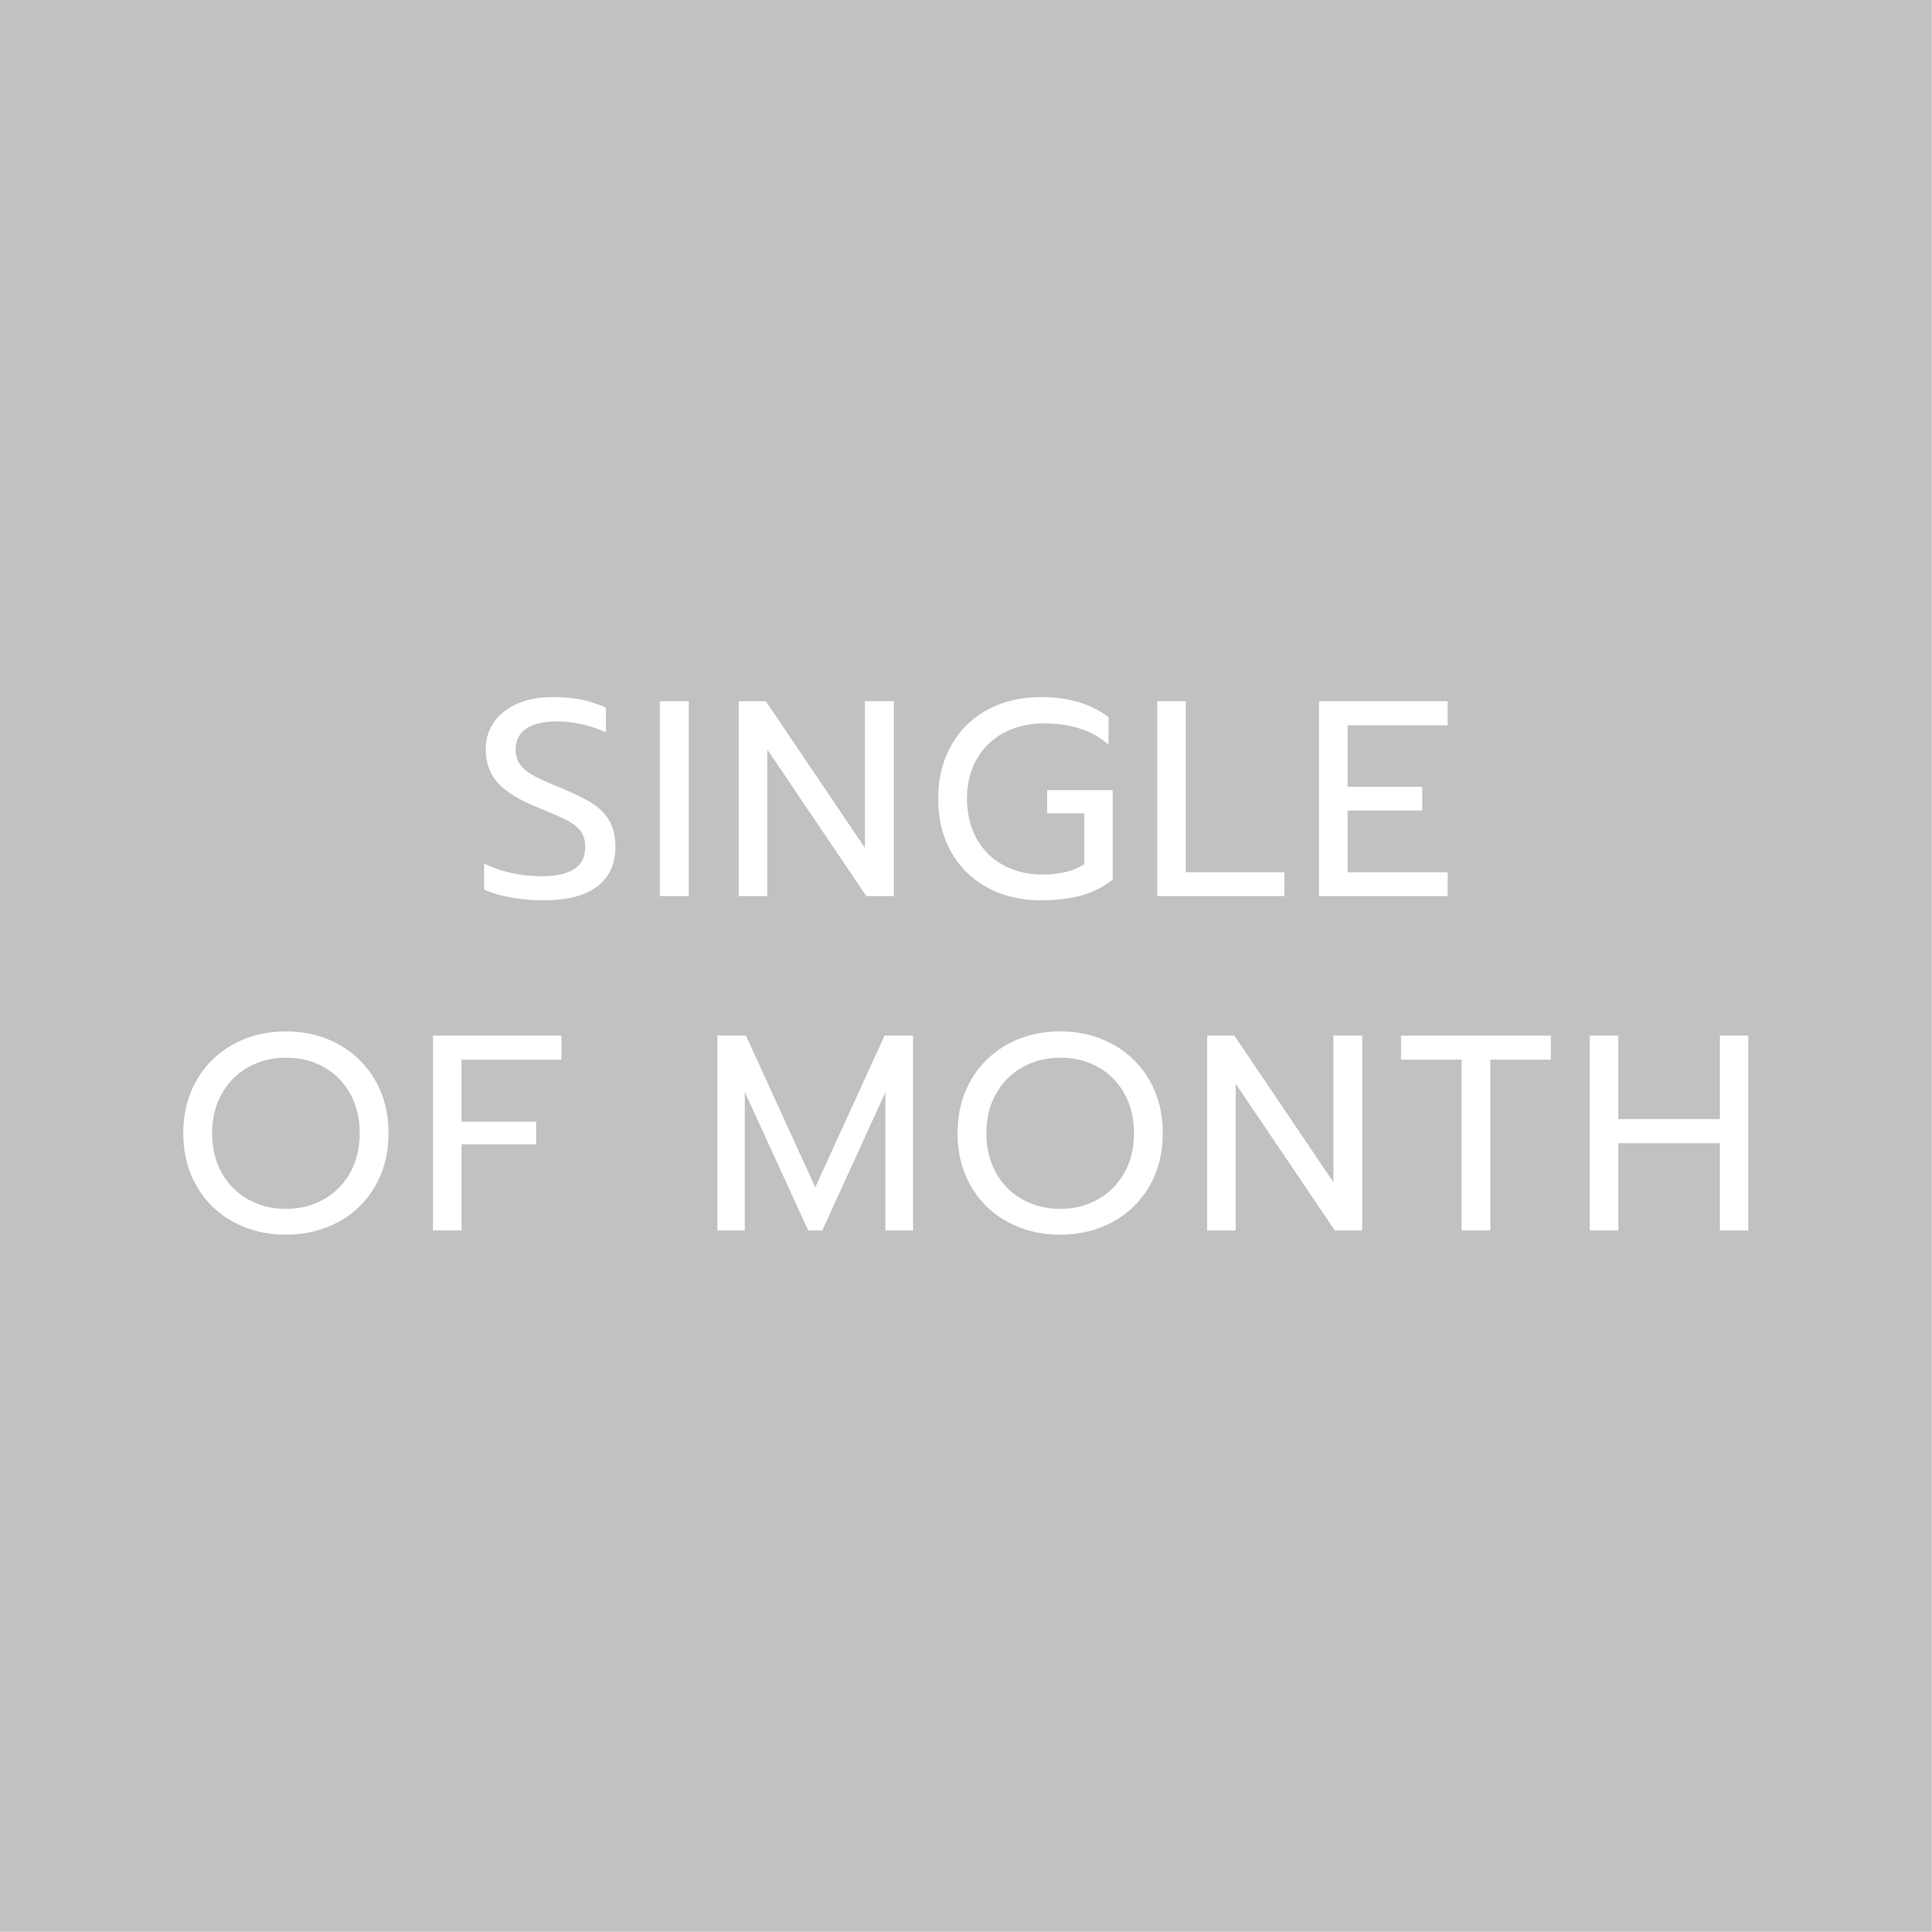 SINGLE OF MONTH